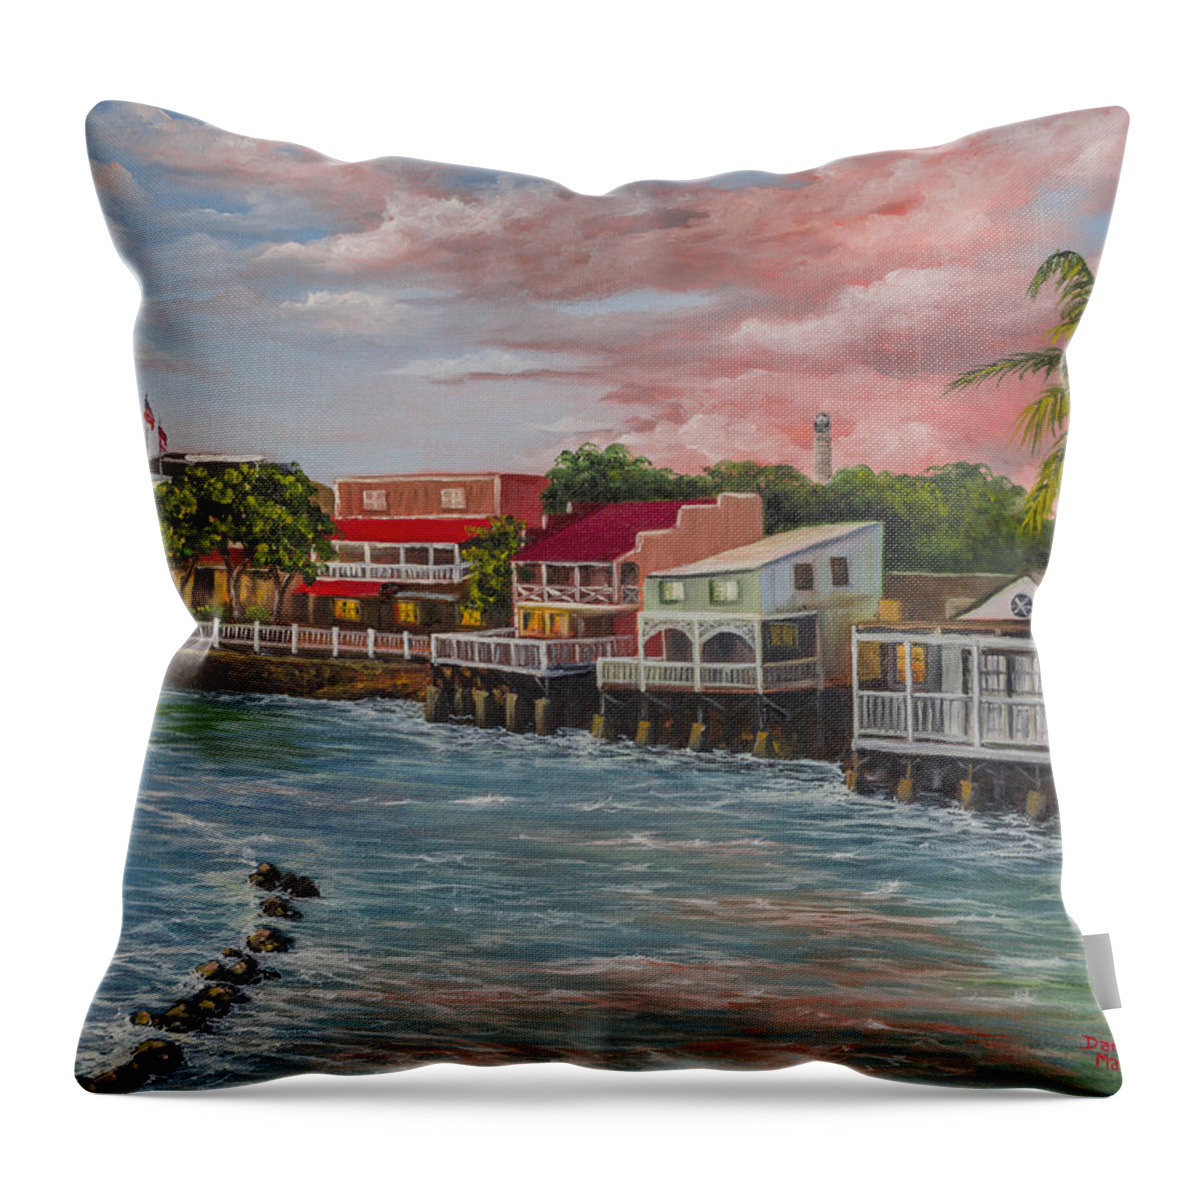 Landscape Throw Pillow featuring the painting Front Street Lahaina At Sunset by Darice Machel McGuire